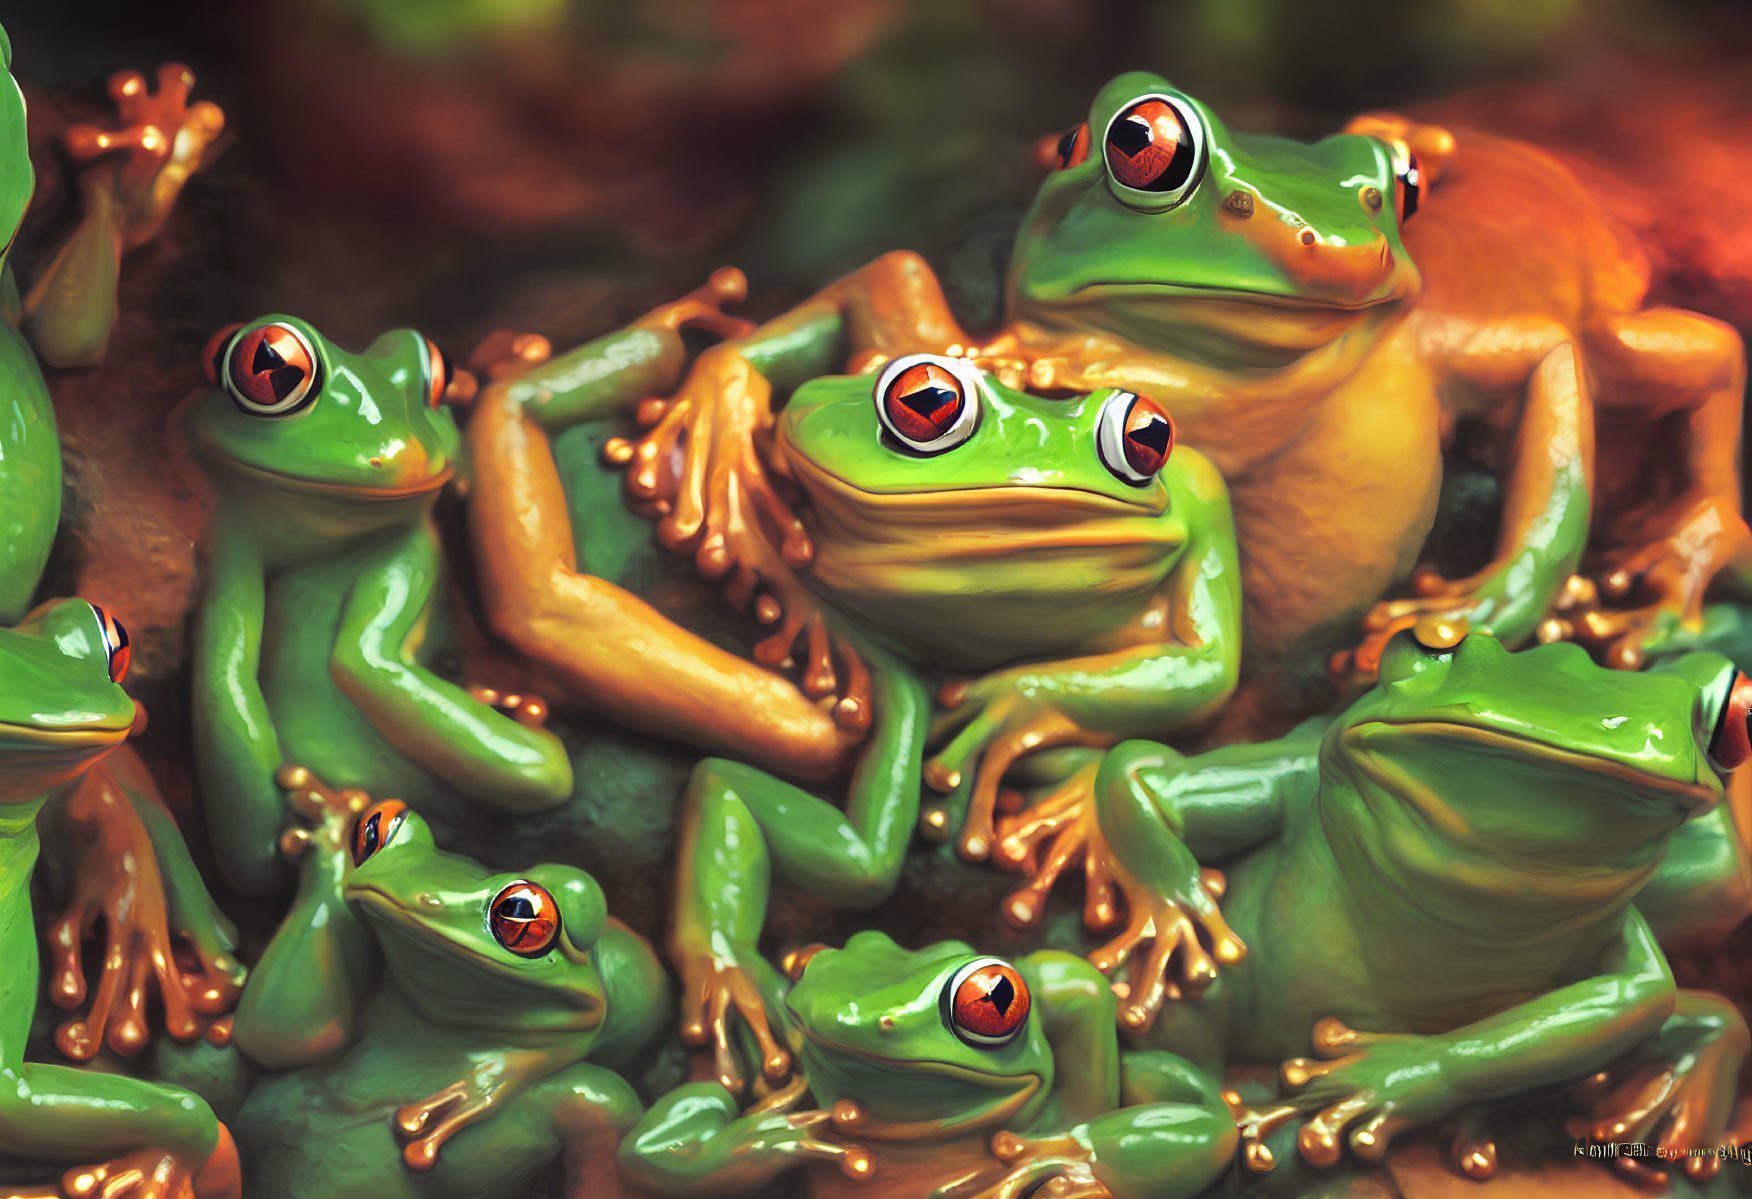 Vibrant green frogs with red eyes in close proximity